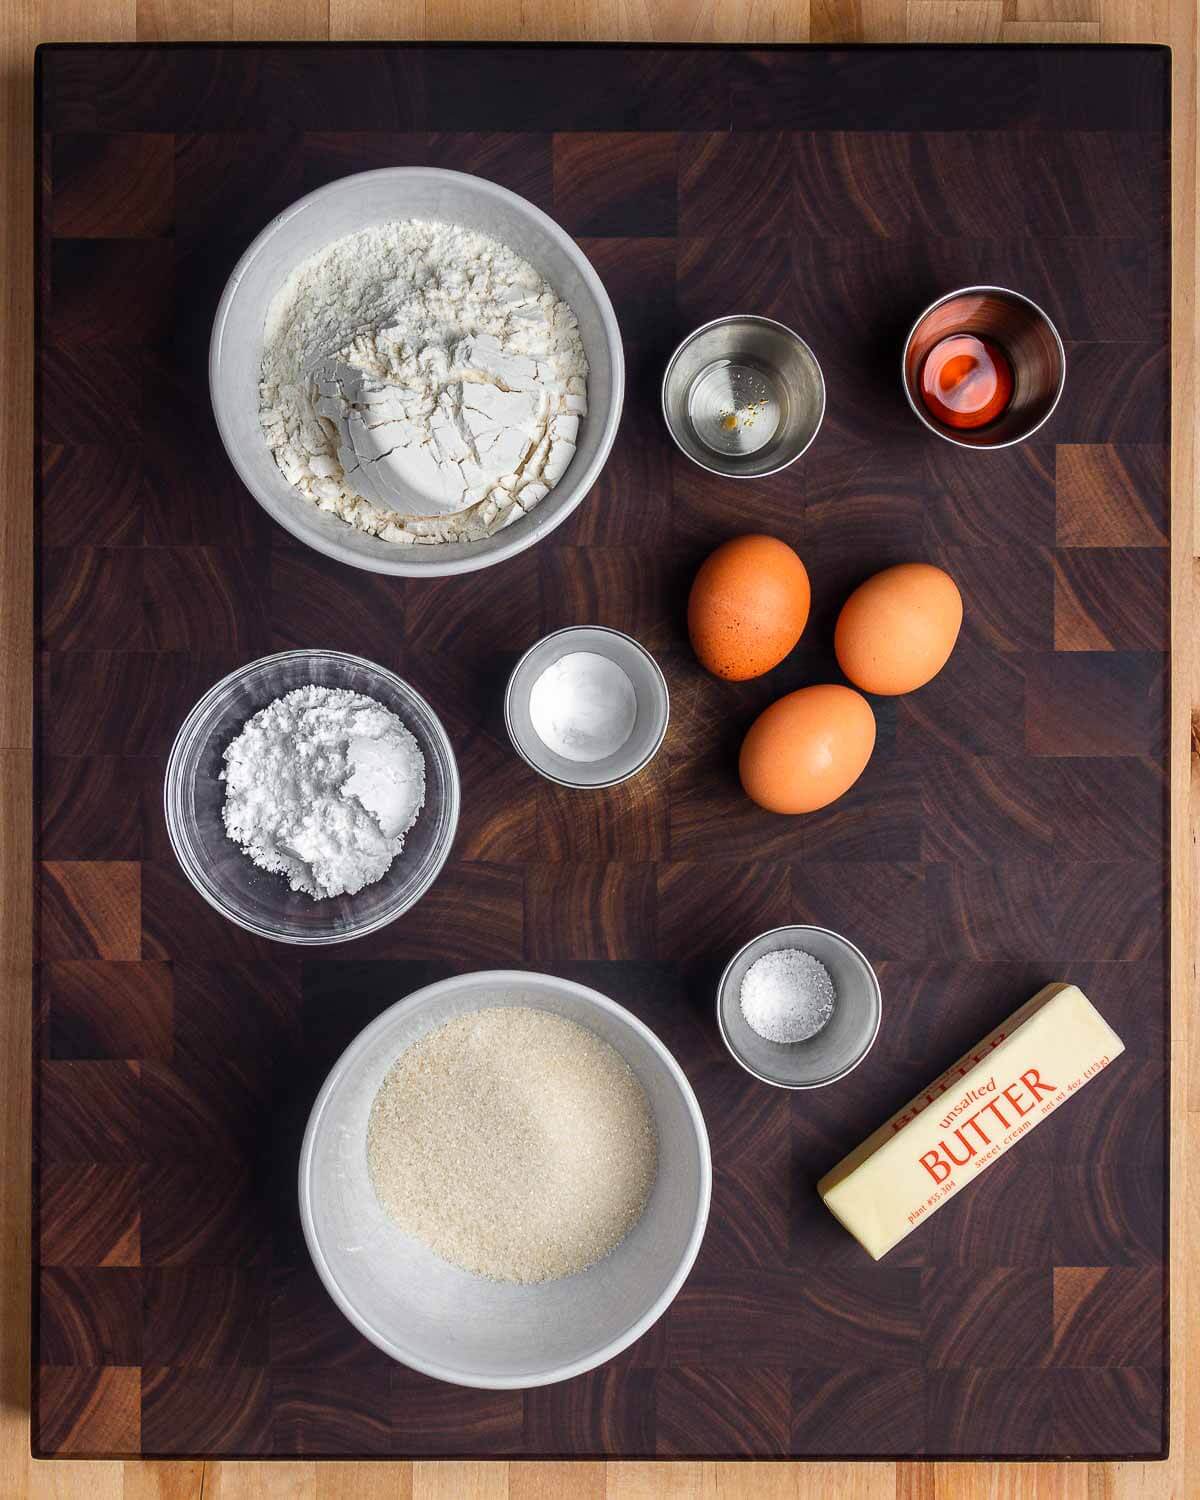 Ingredients shown: flour, anise extract, vanilla extract, powdered sugar, baking powder, eggs, sugar, salt, and butter.